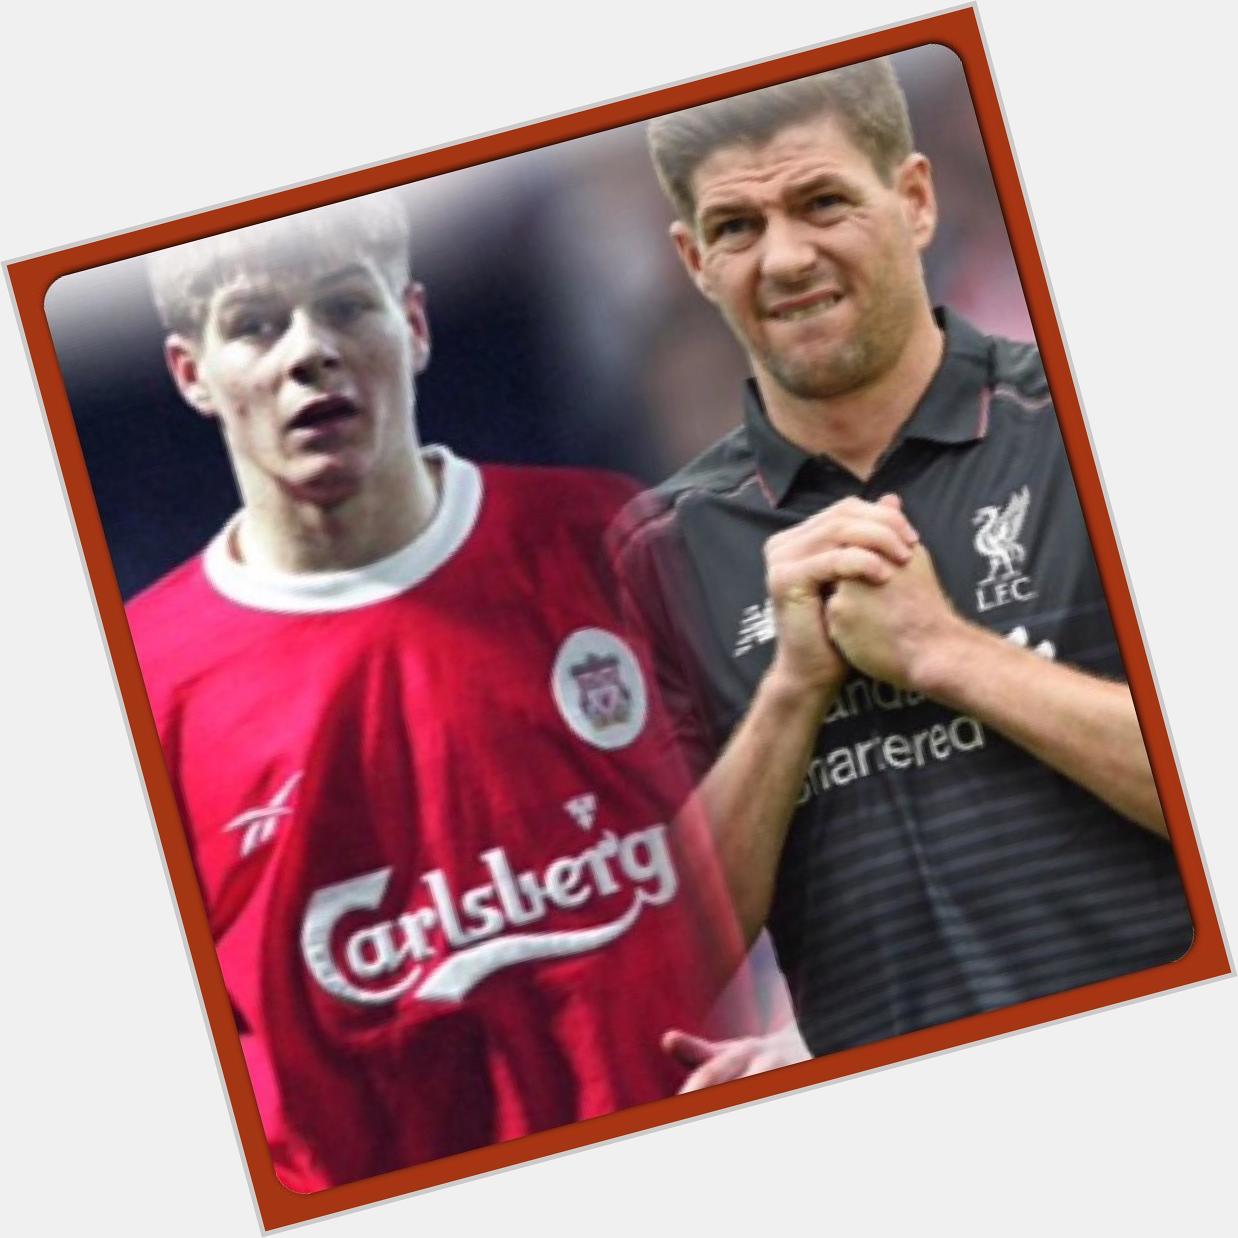 Happy Birthday to my Hero Steven Gerrard. 35 Today. Your just boss you are lad! 